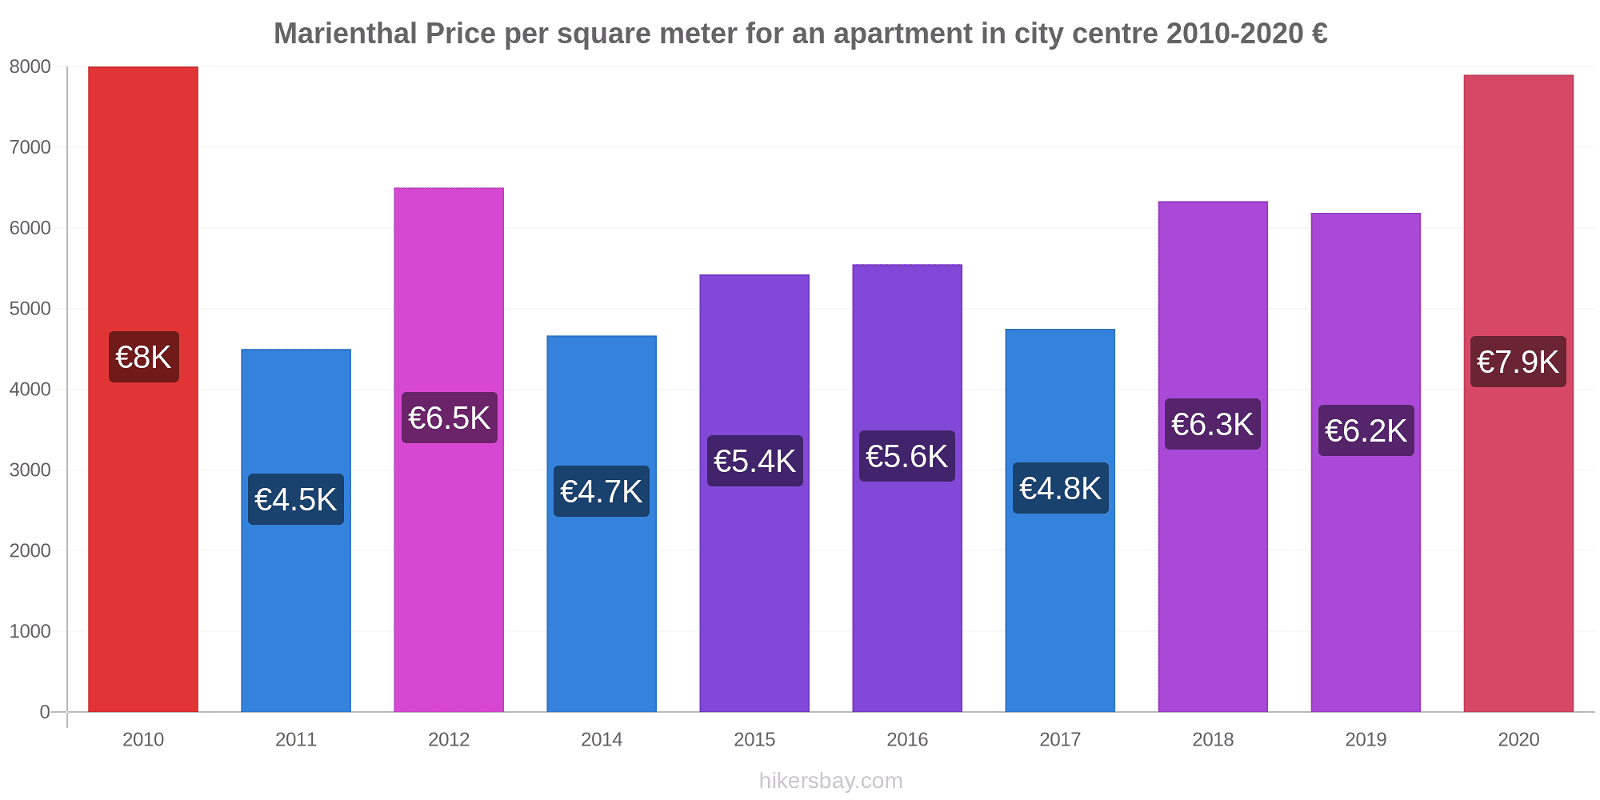 Marienthal price changes Price per square meter for an apartment in city centre hikersbay.com